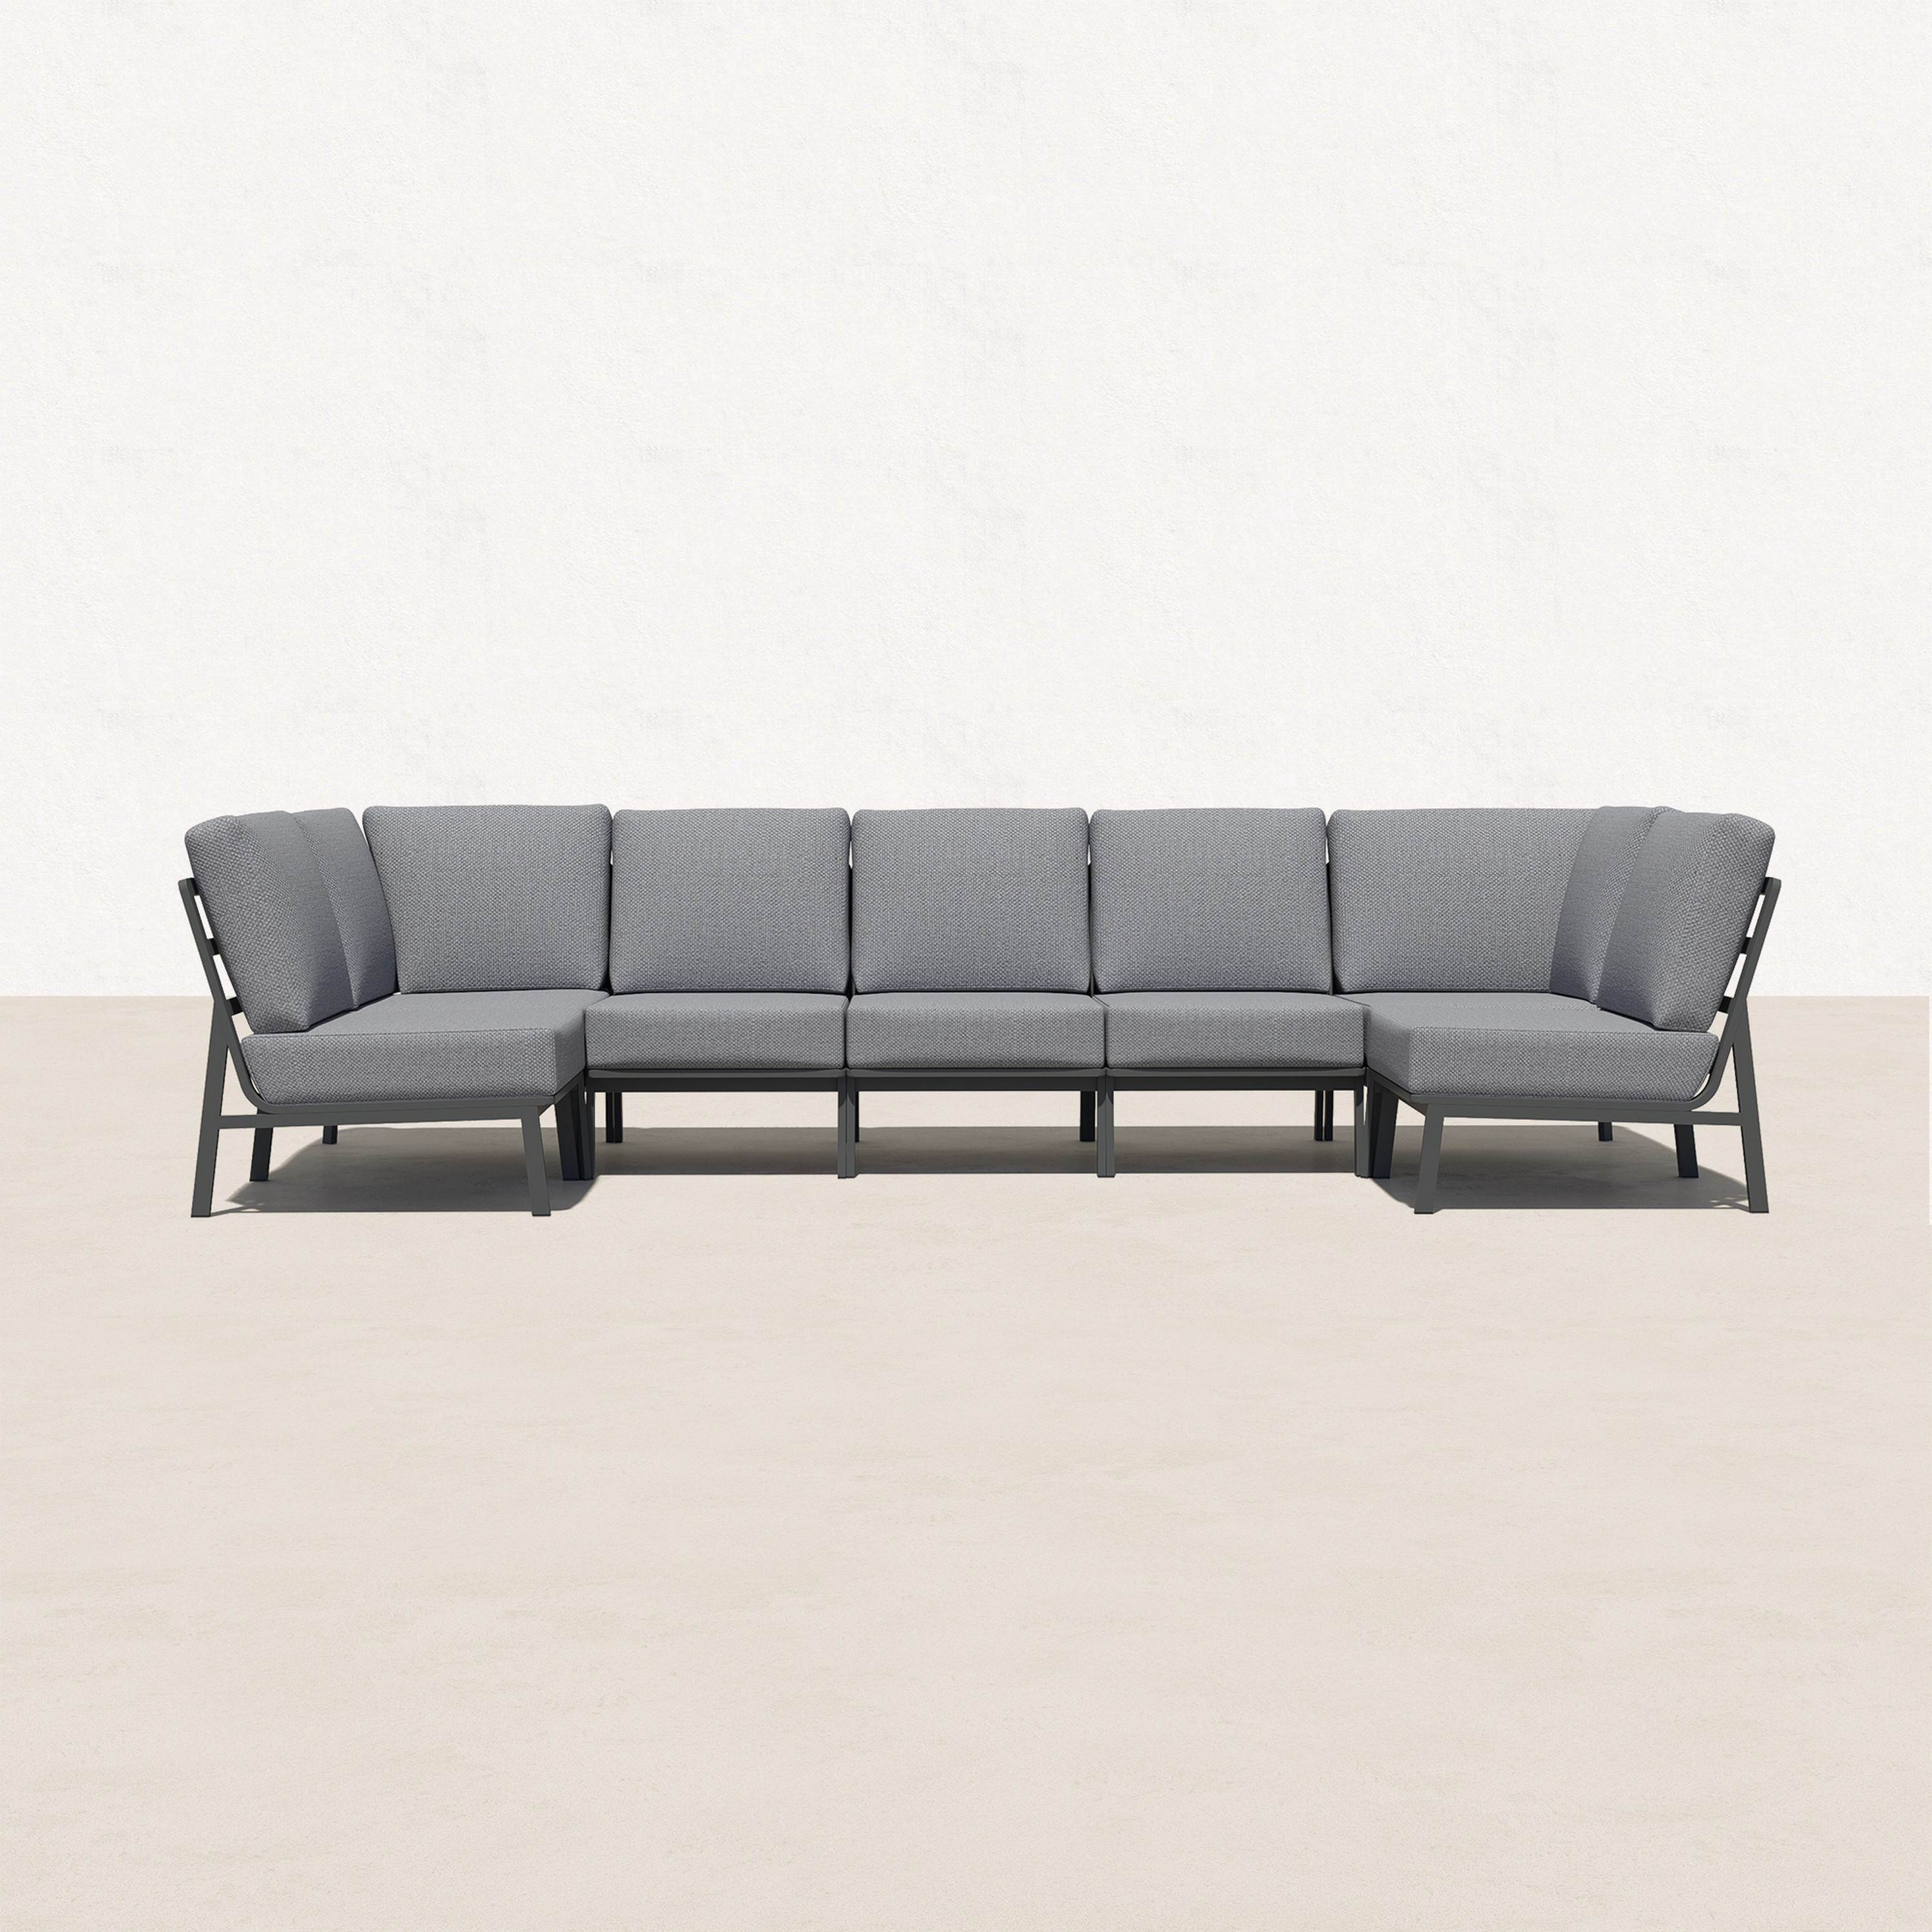 Orion Outdoor U Sectional - 7 Seat